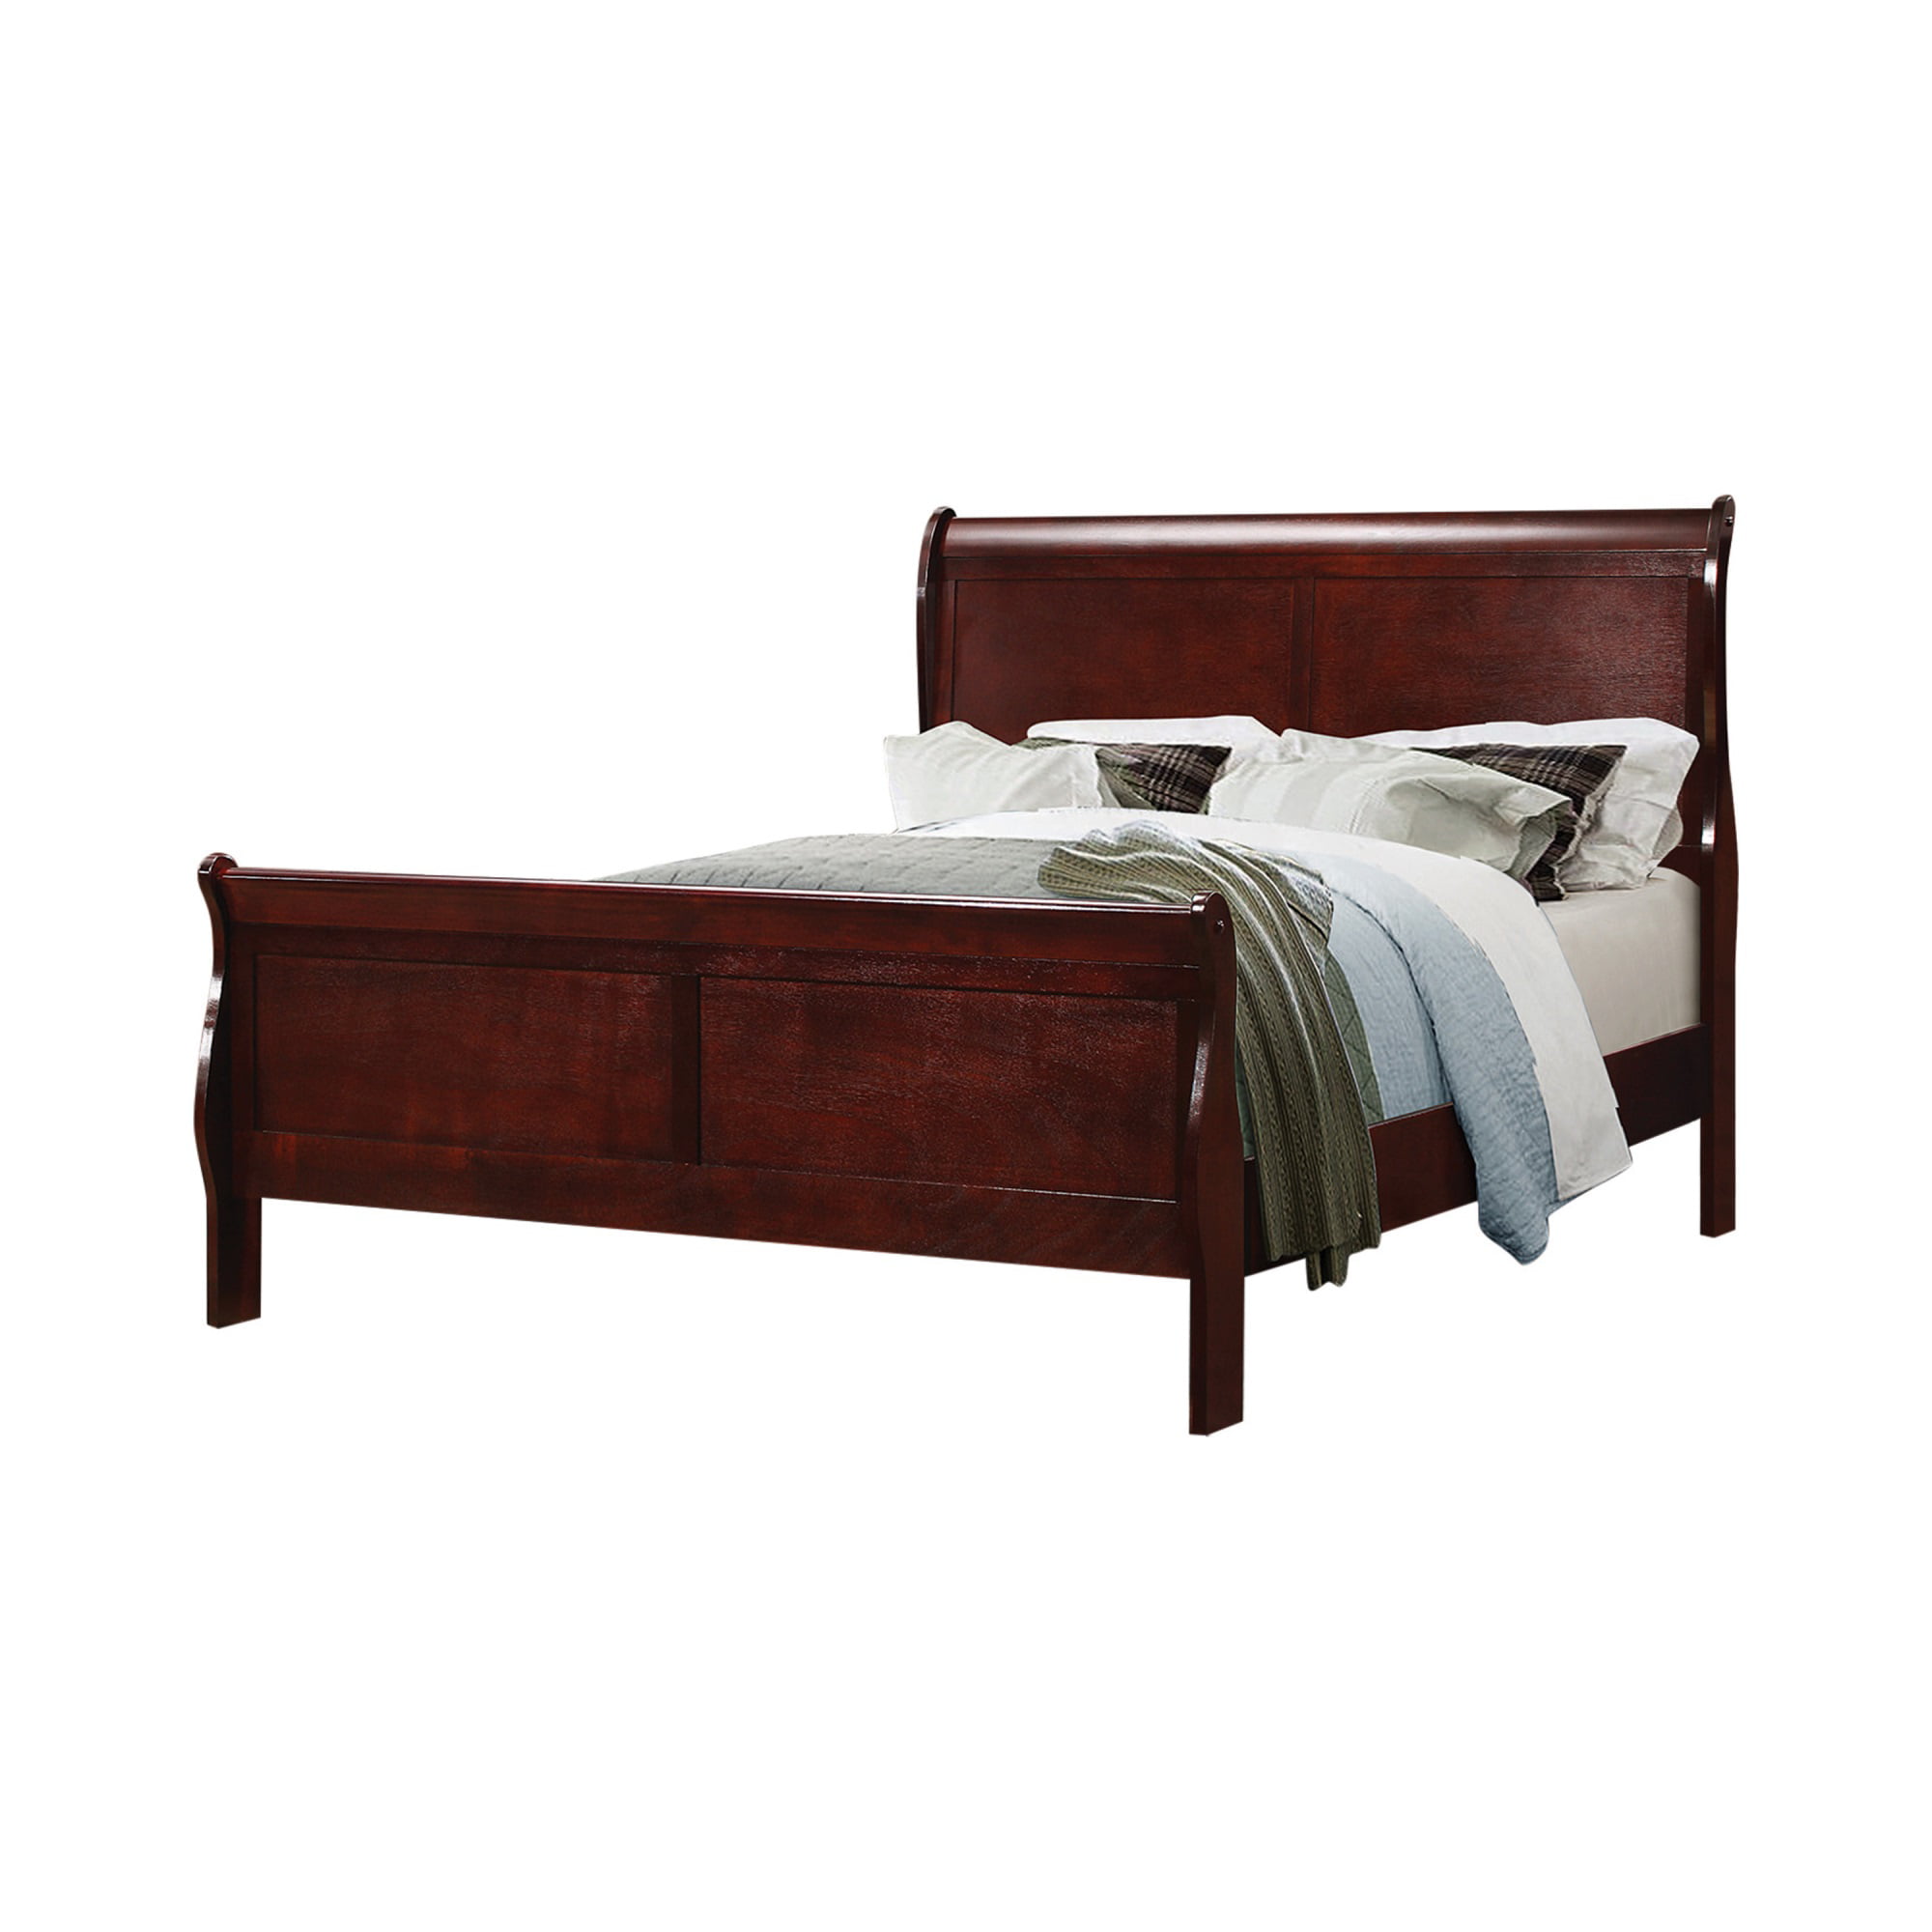 Bed With Curved Headboard, Cherry Wood Headboard And Footboard